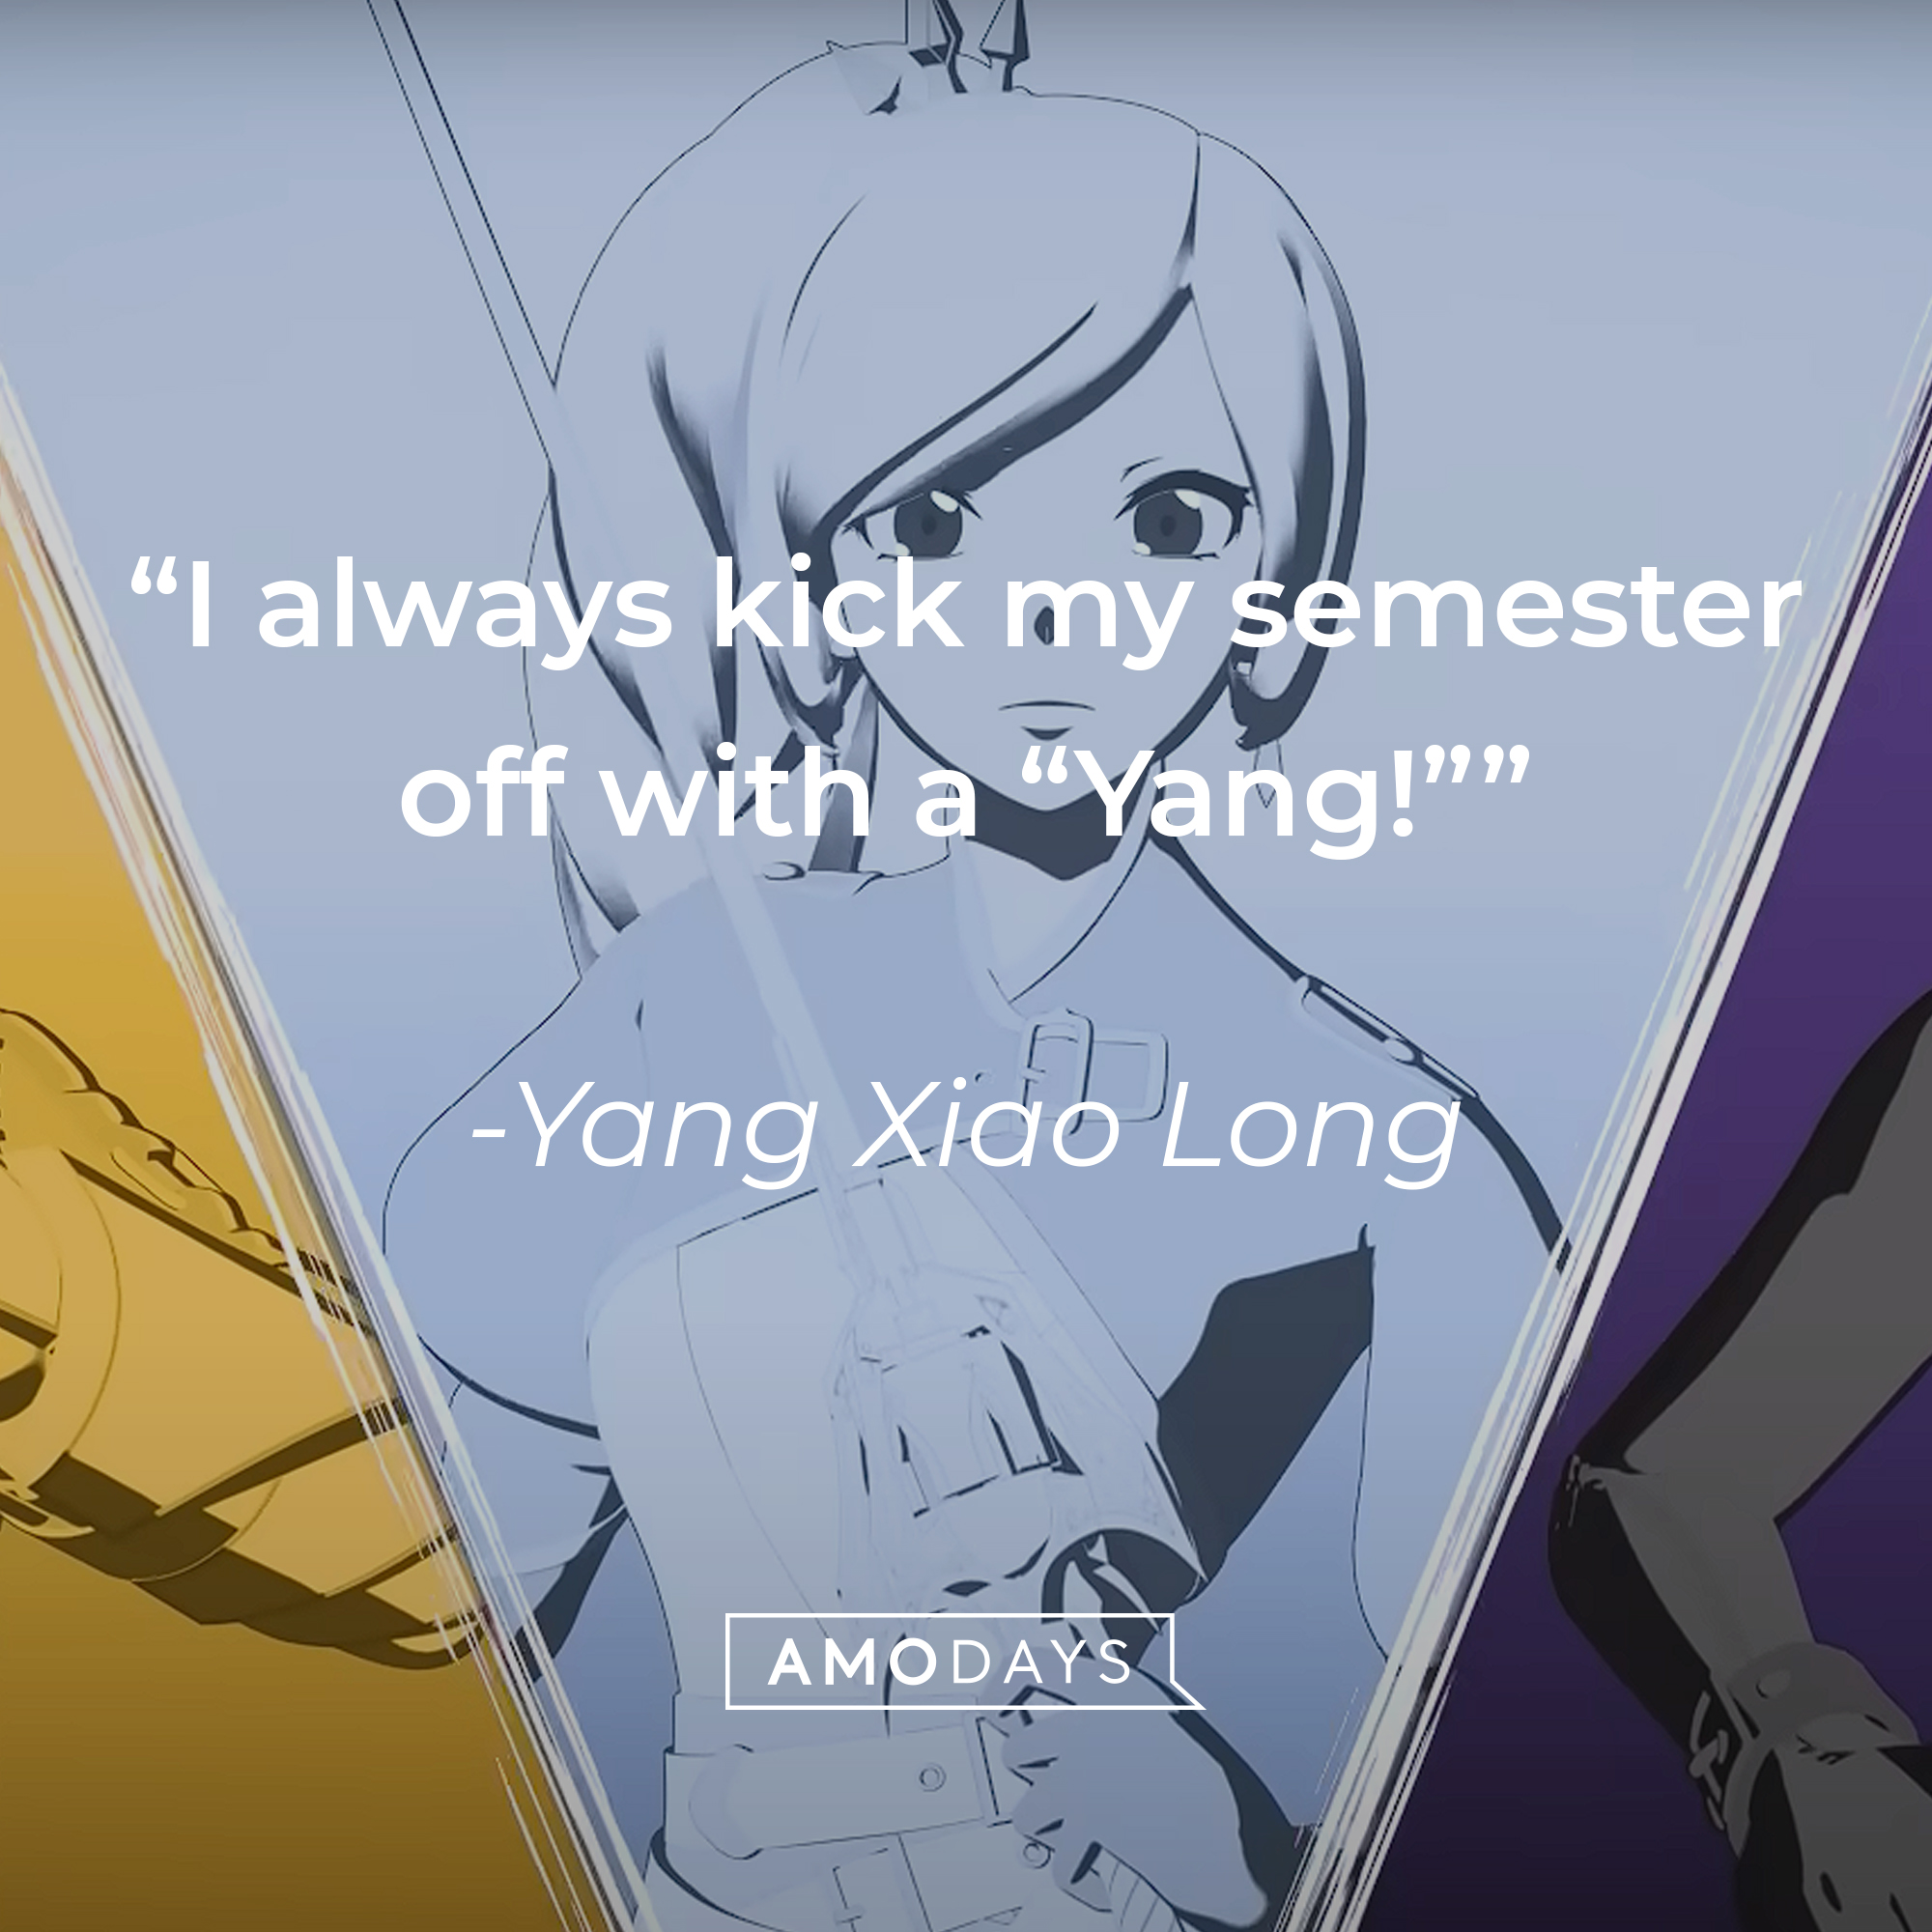 Yang Xiao Long's quote: "I always kick my semester off with a "Yang!"" | Source: Youtube.com/crunchyrolldubs